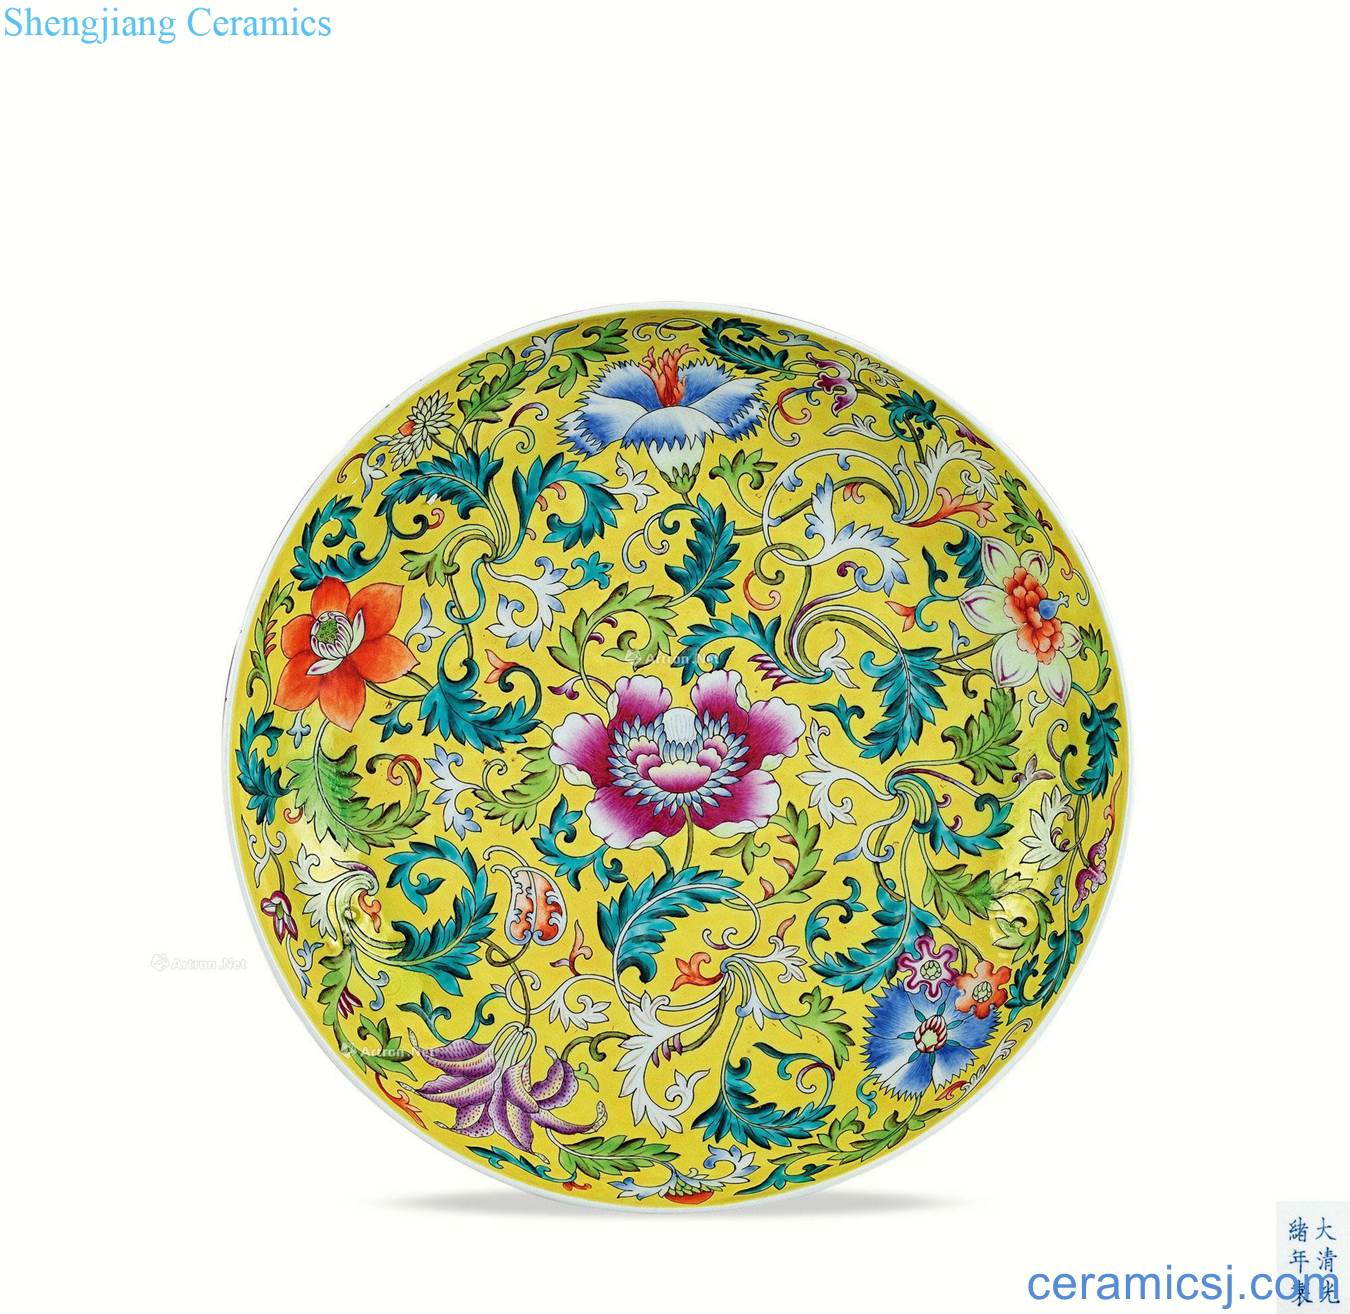 In the qing dynasty To pastel yellow lotus flower pattern plate